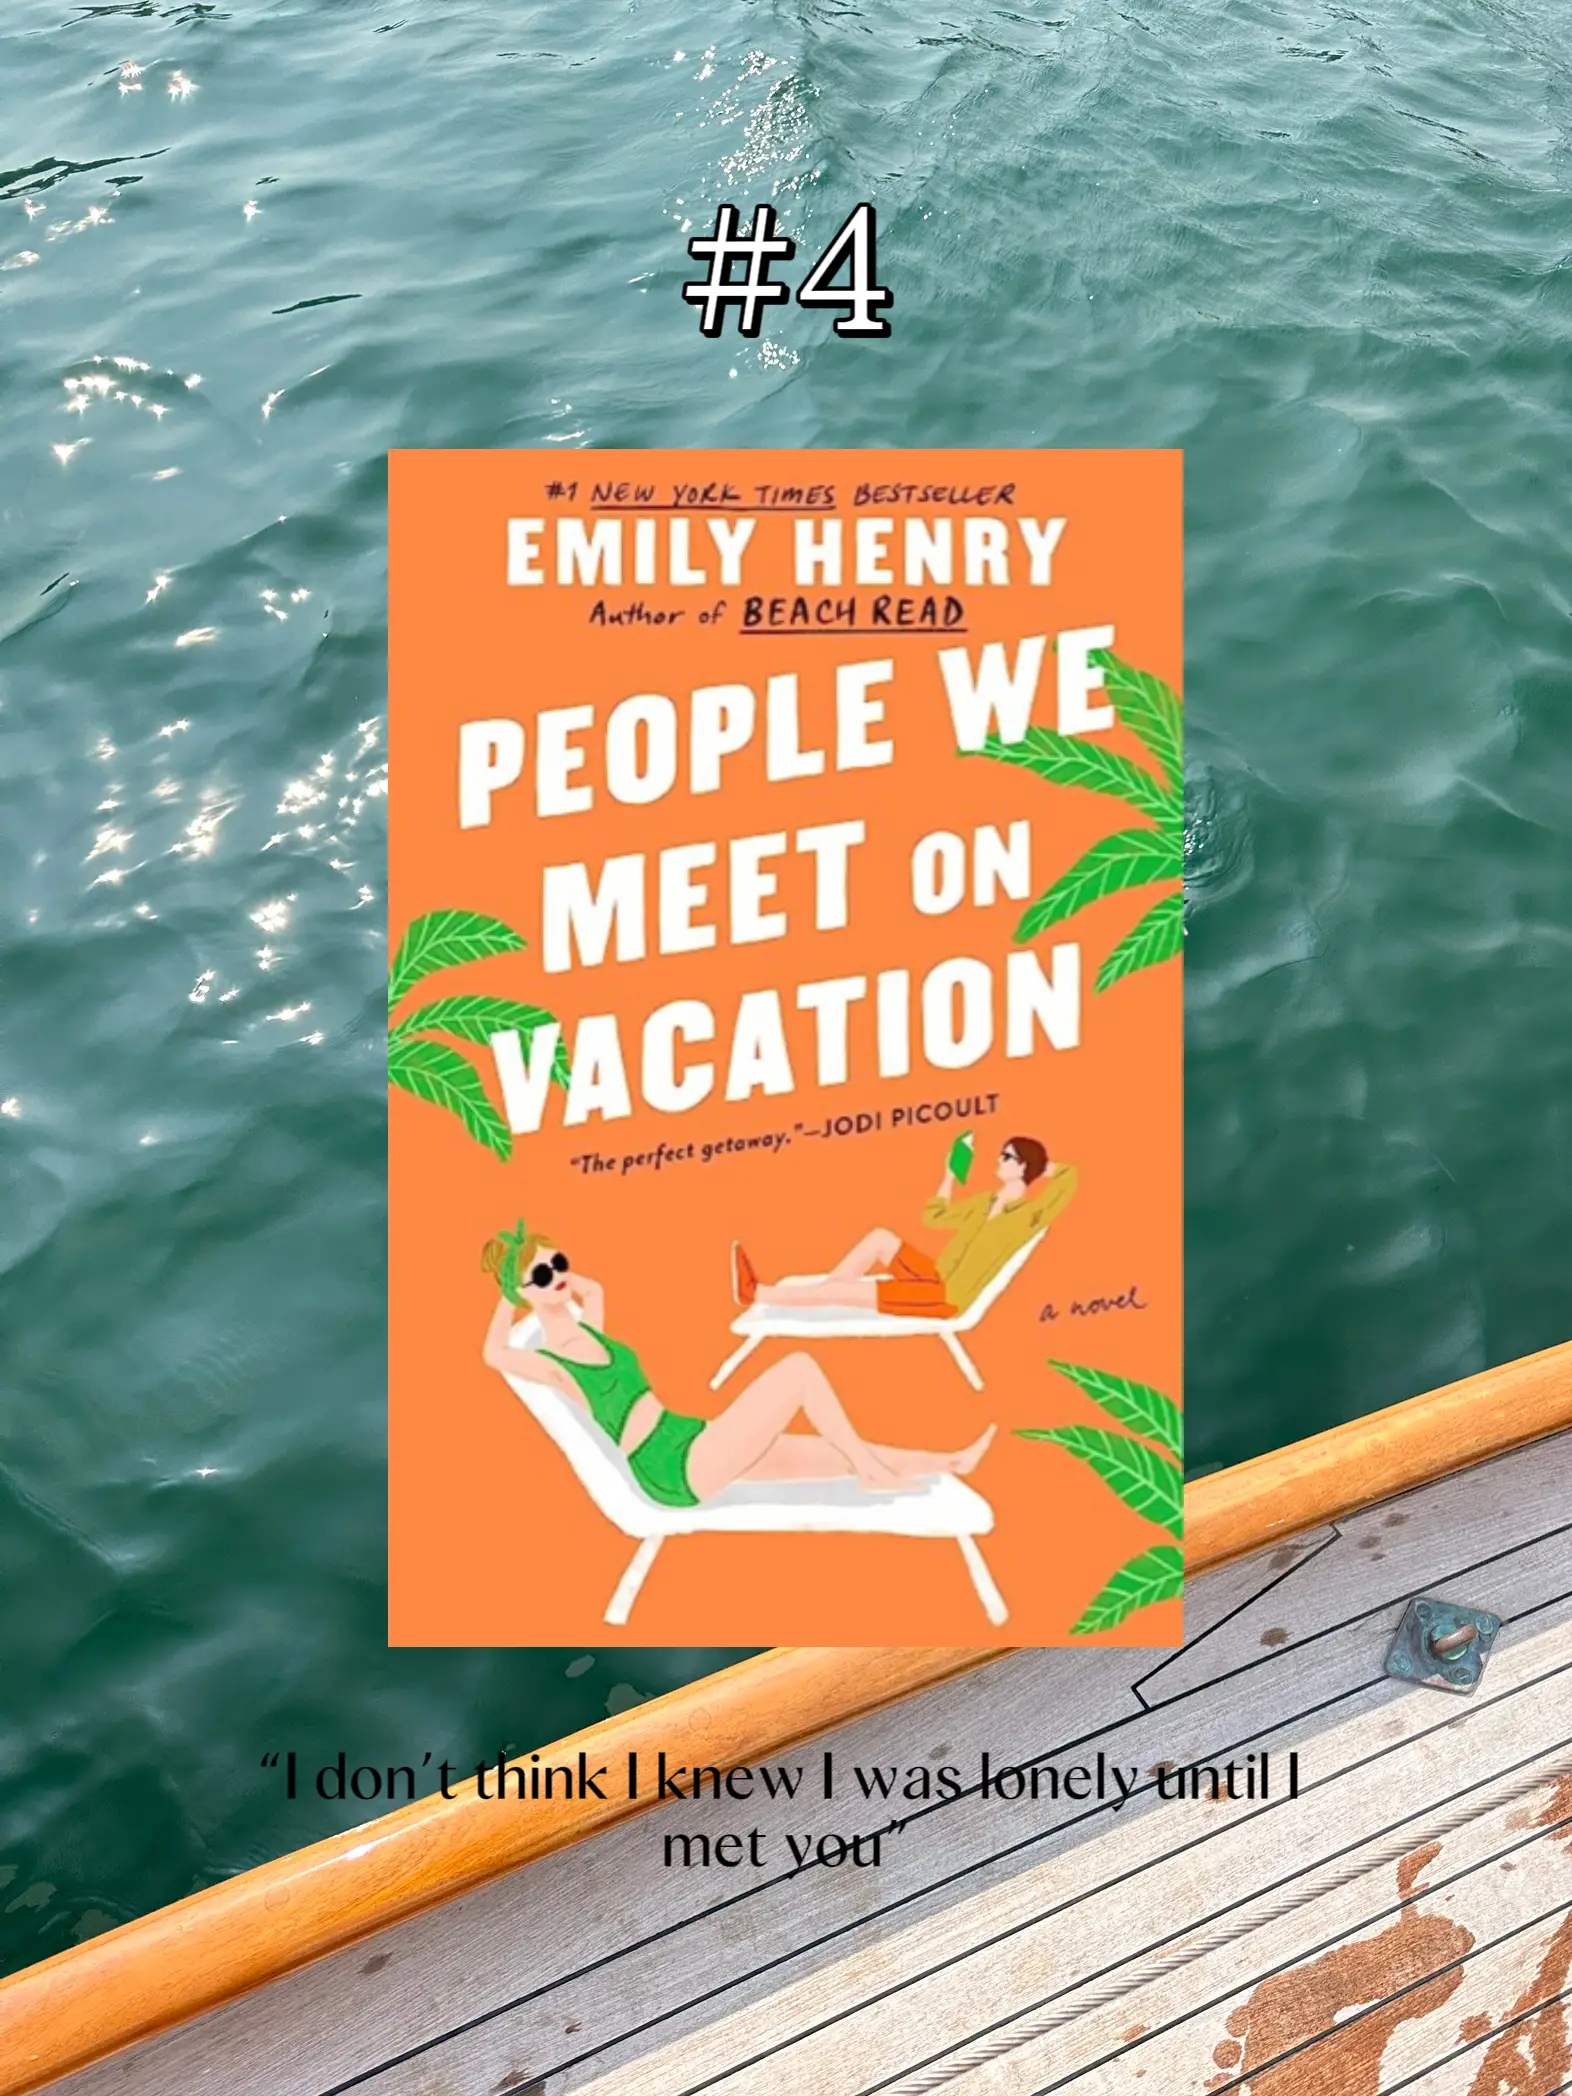 my emily henry rankings📚💞, Gallery posted by KATIE G